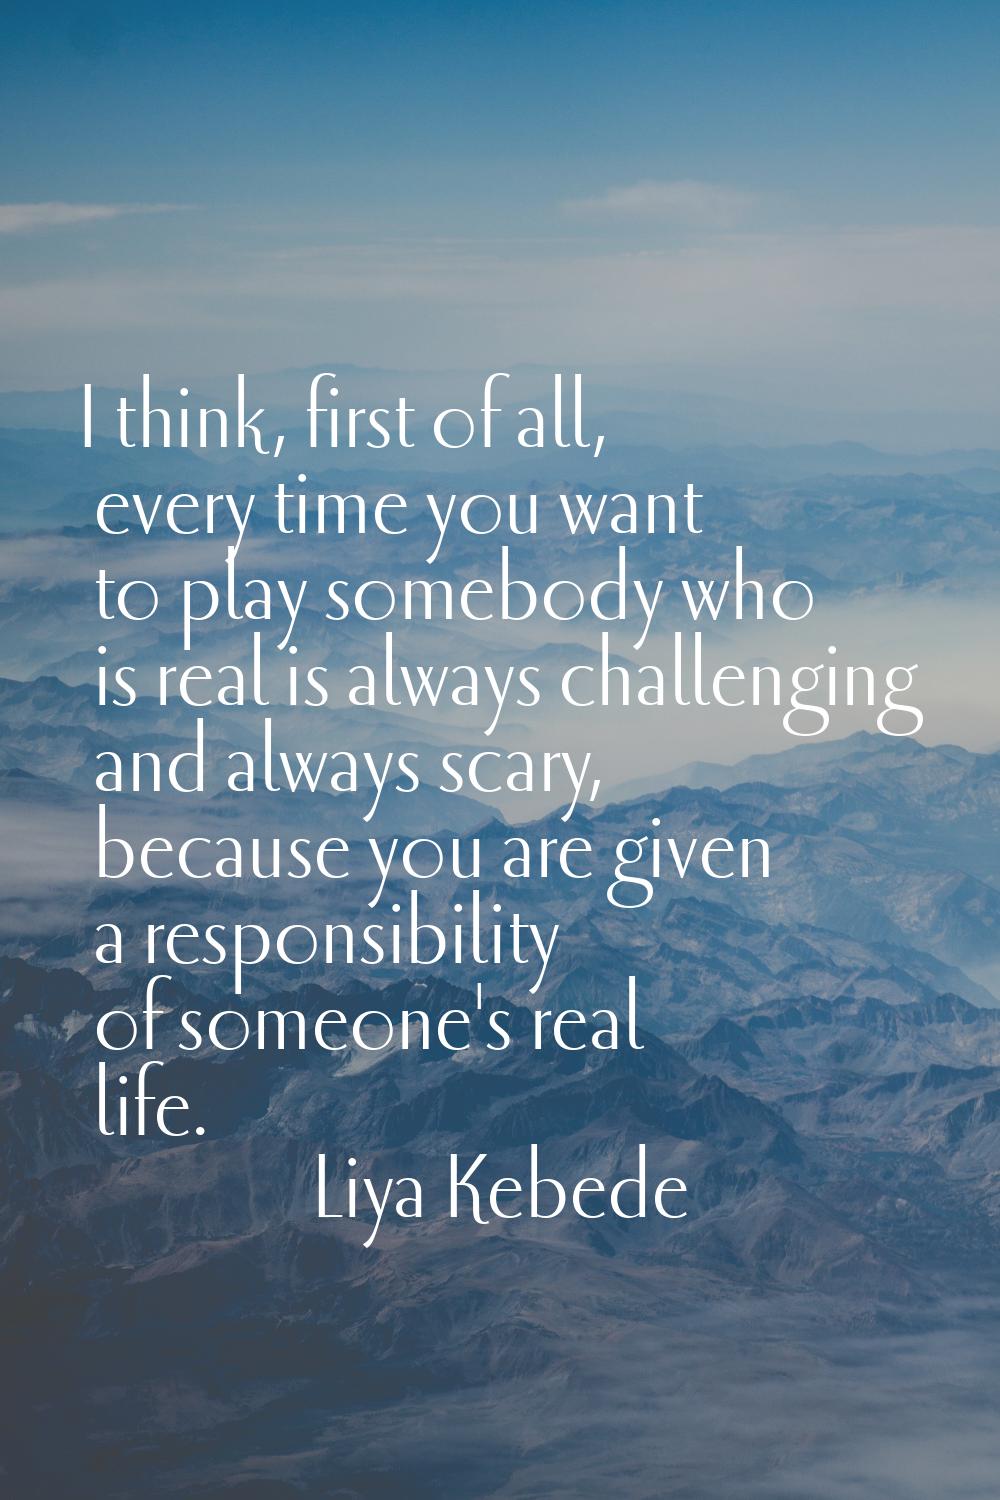 I think, first of all, every time you want to play somebody who is real is always challenging and a